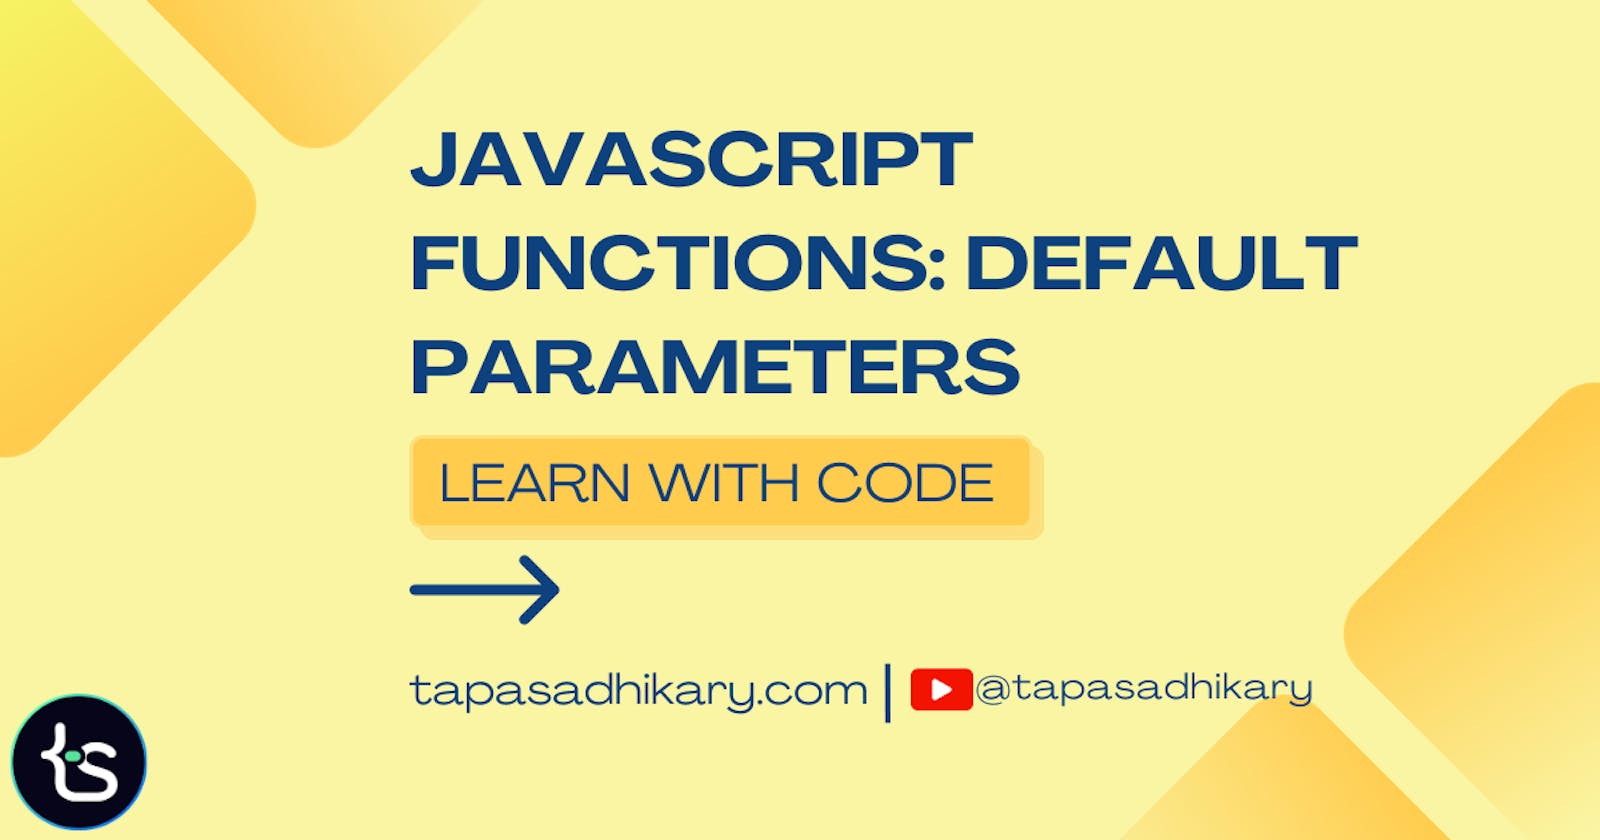 Why use default parameters in JavaScript functions?